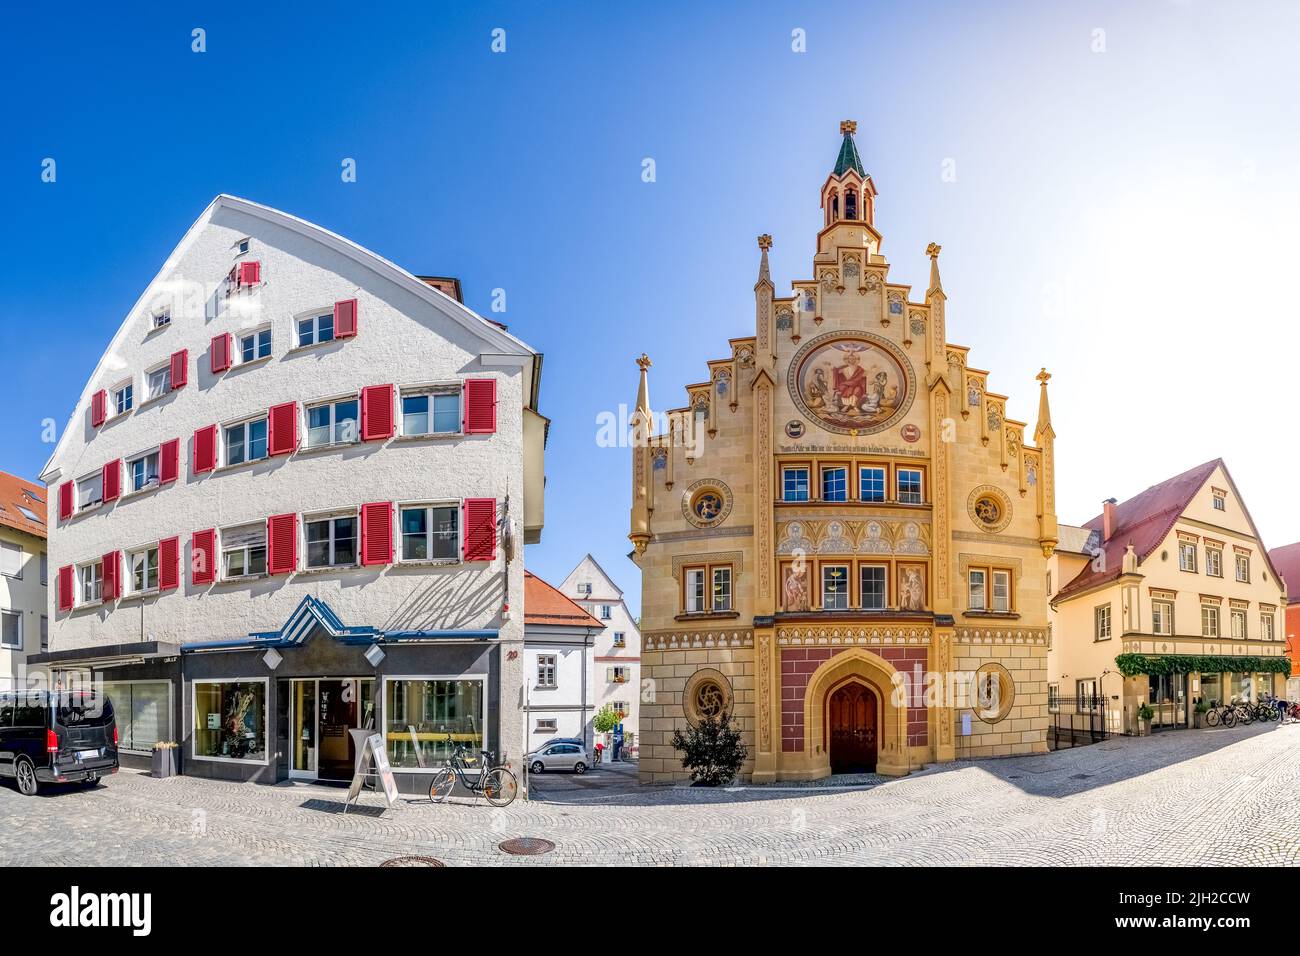 Old Town in Bad Waldsee, Germany Stock Photo